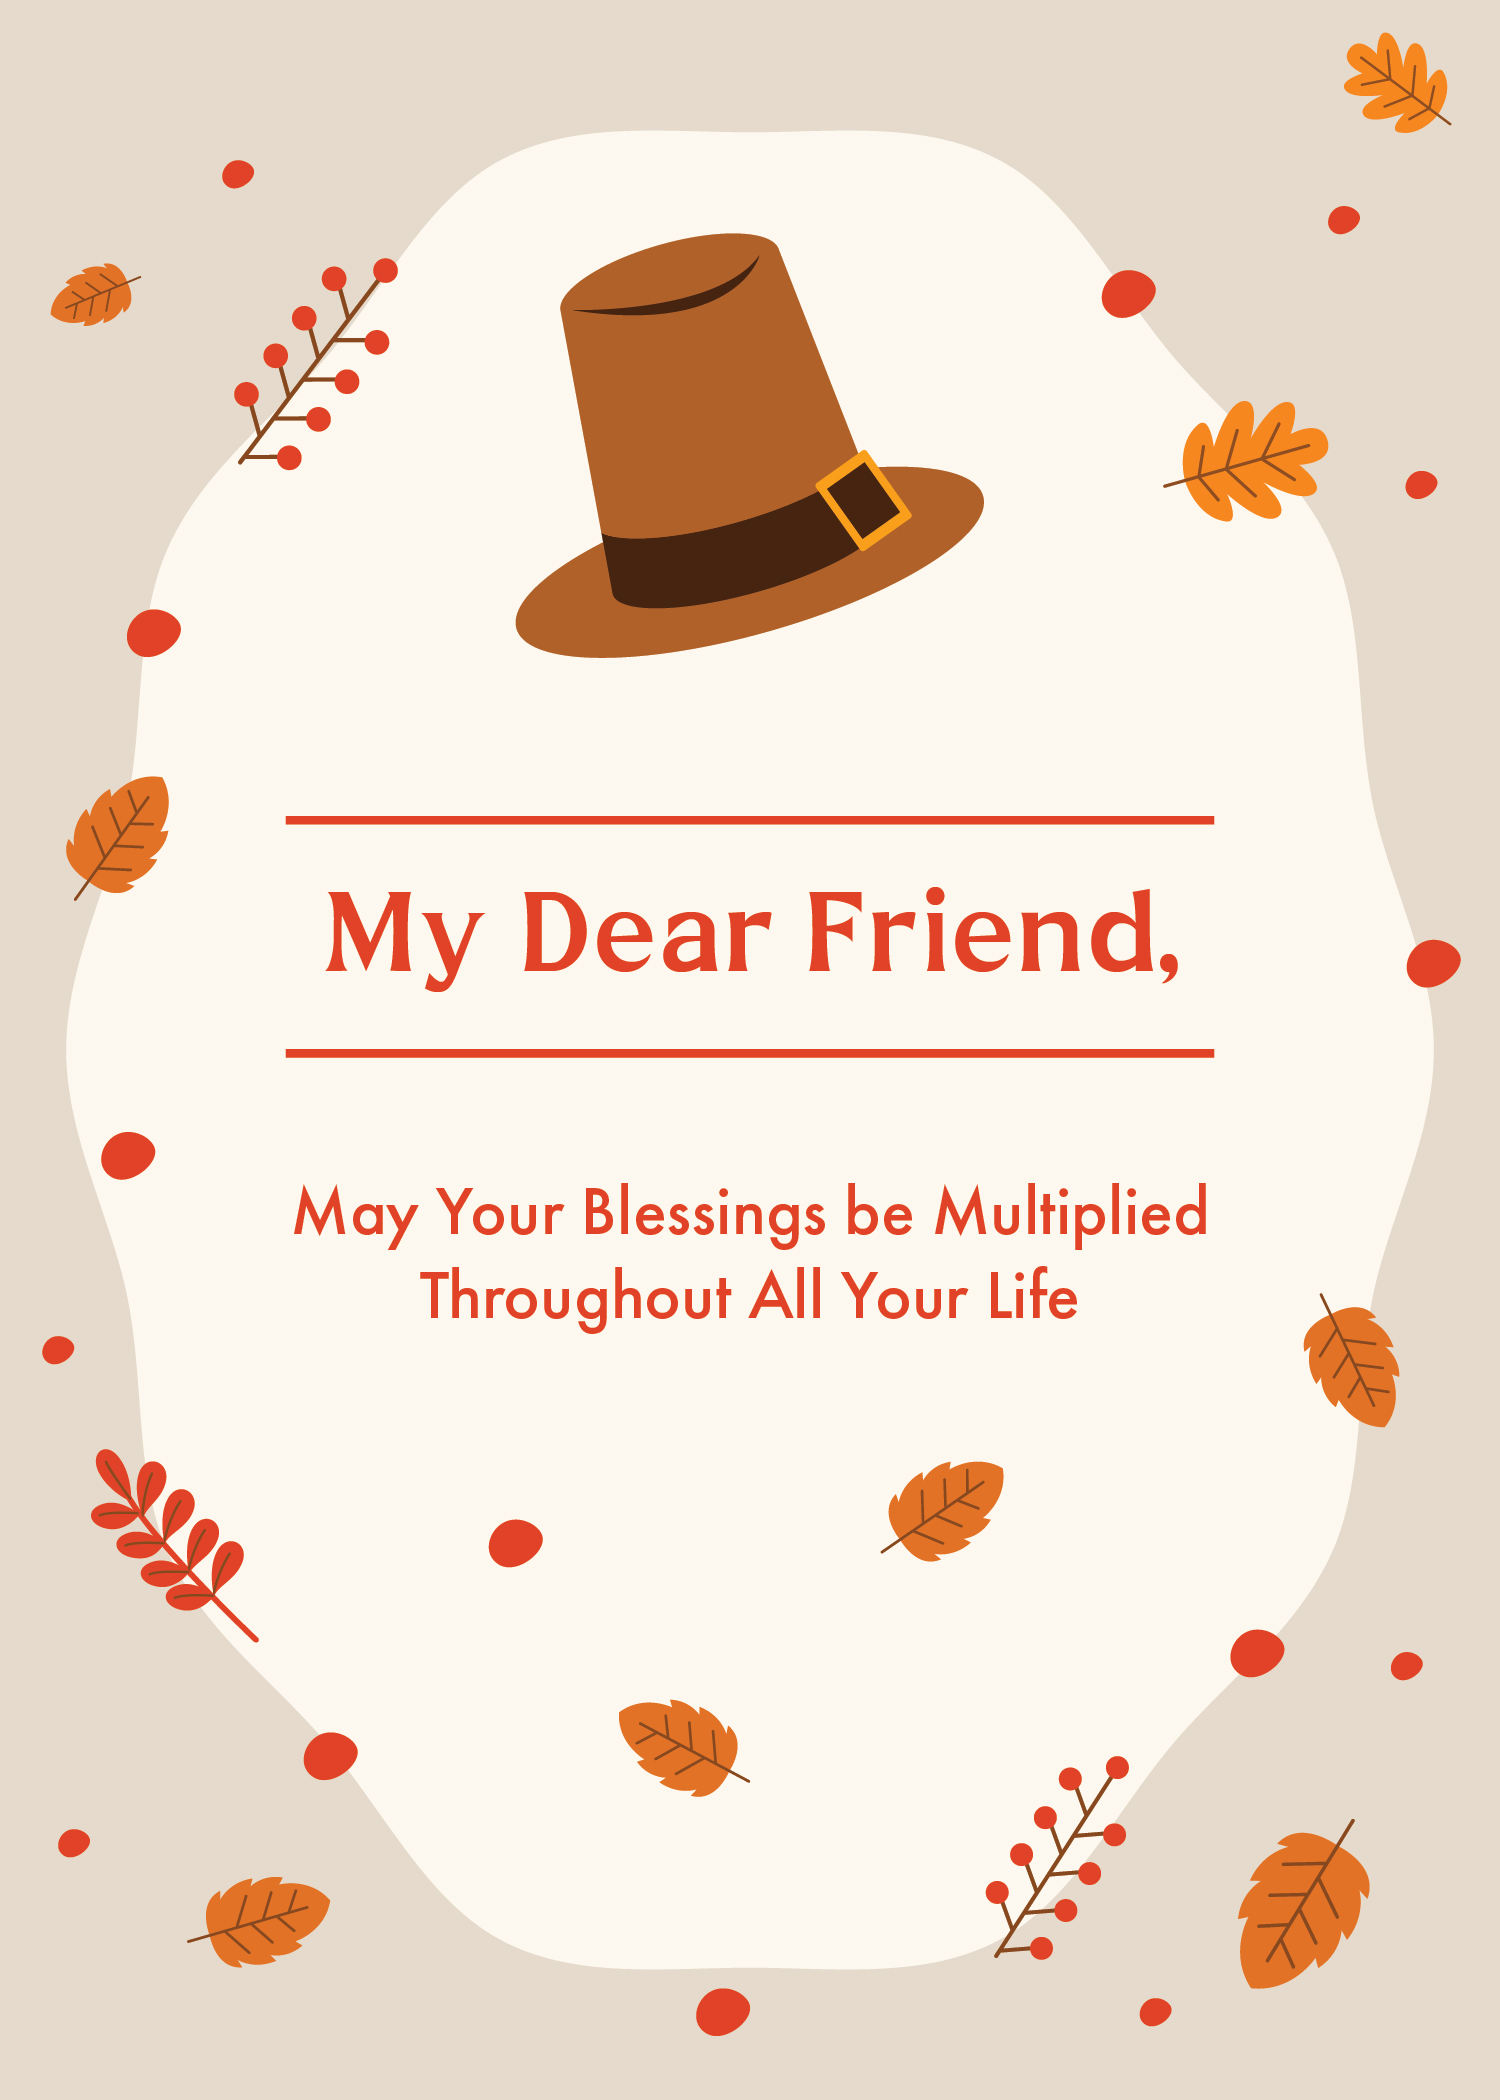 Free Thanksgiving Day Wishes For Friend in Word, Google Docs, Illustrator, PSD, Apple Pages, Publisher, EPS, SVG, JPG, PNG